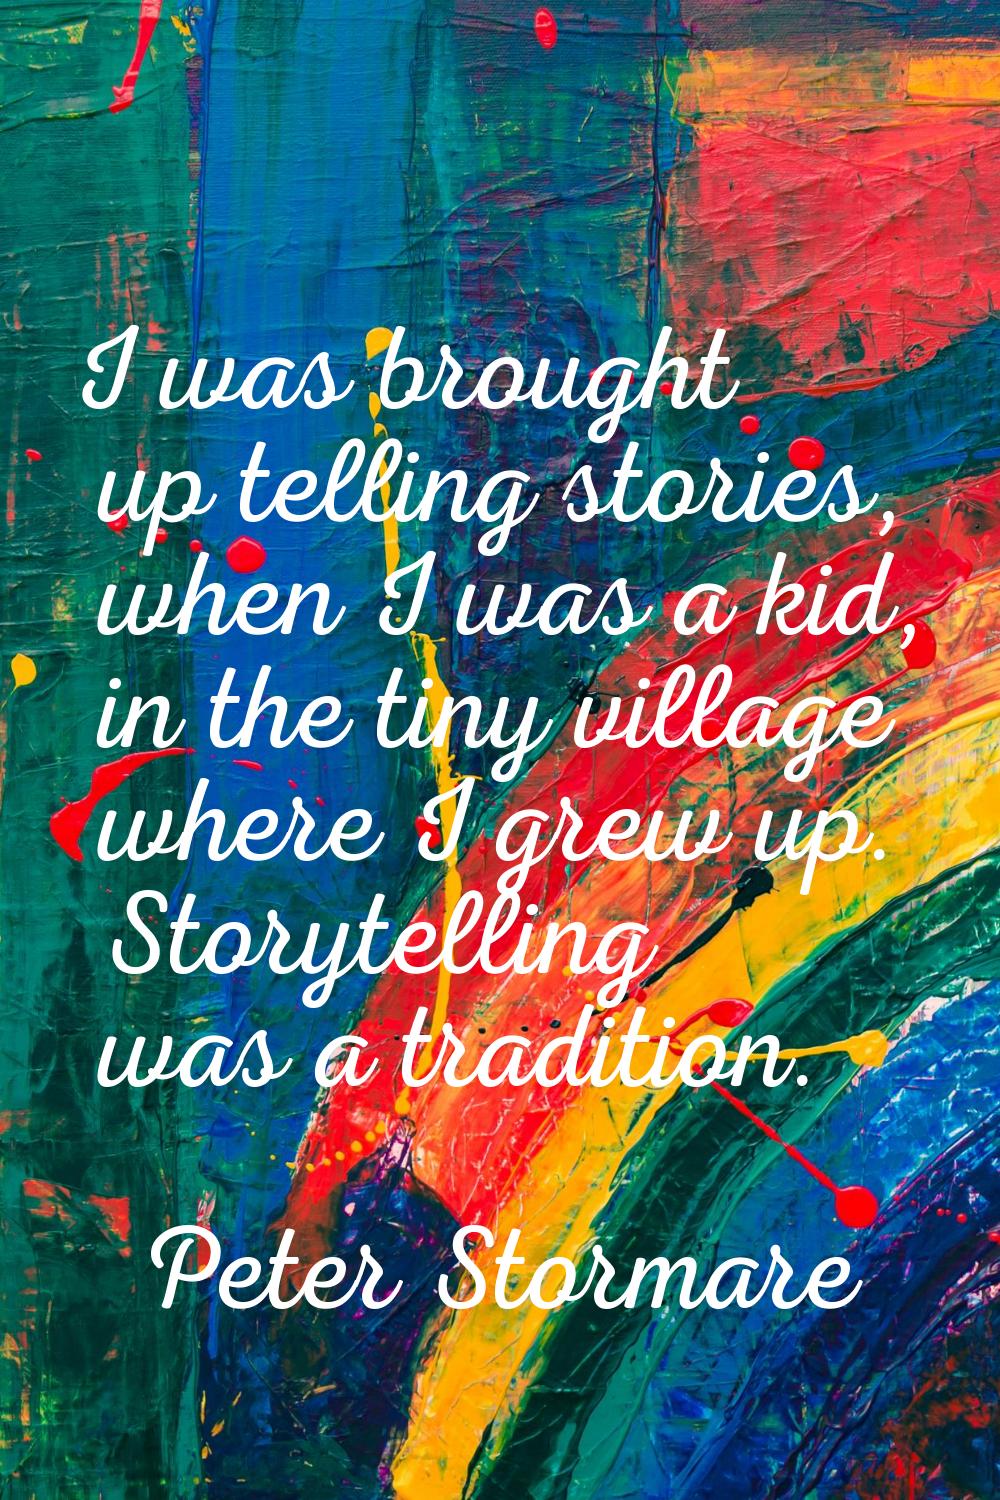 I was brought up telling stories, when I was a kid, in the tiny village where I grew up. Storytelli